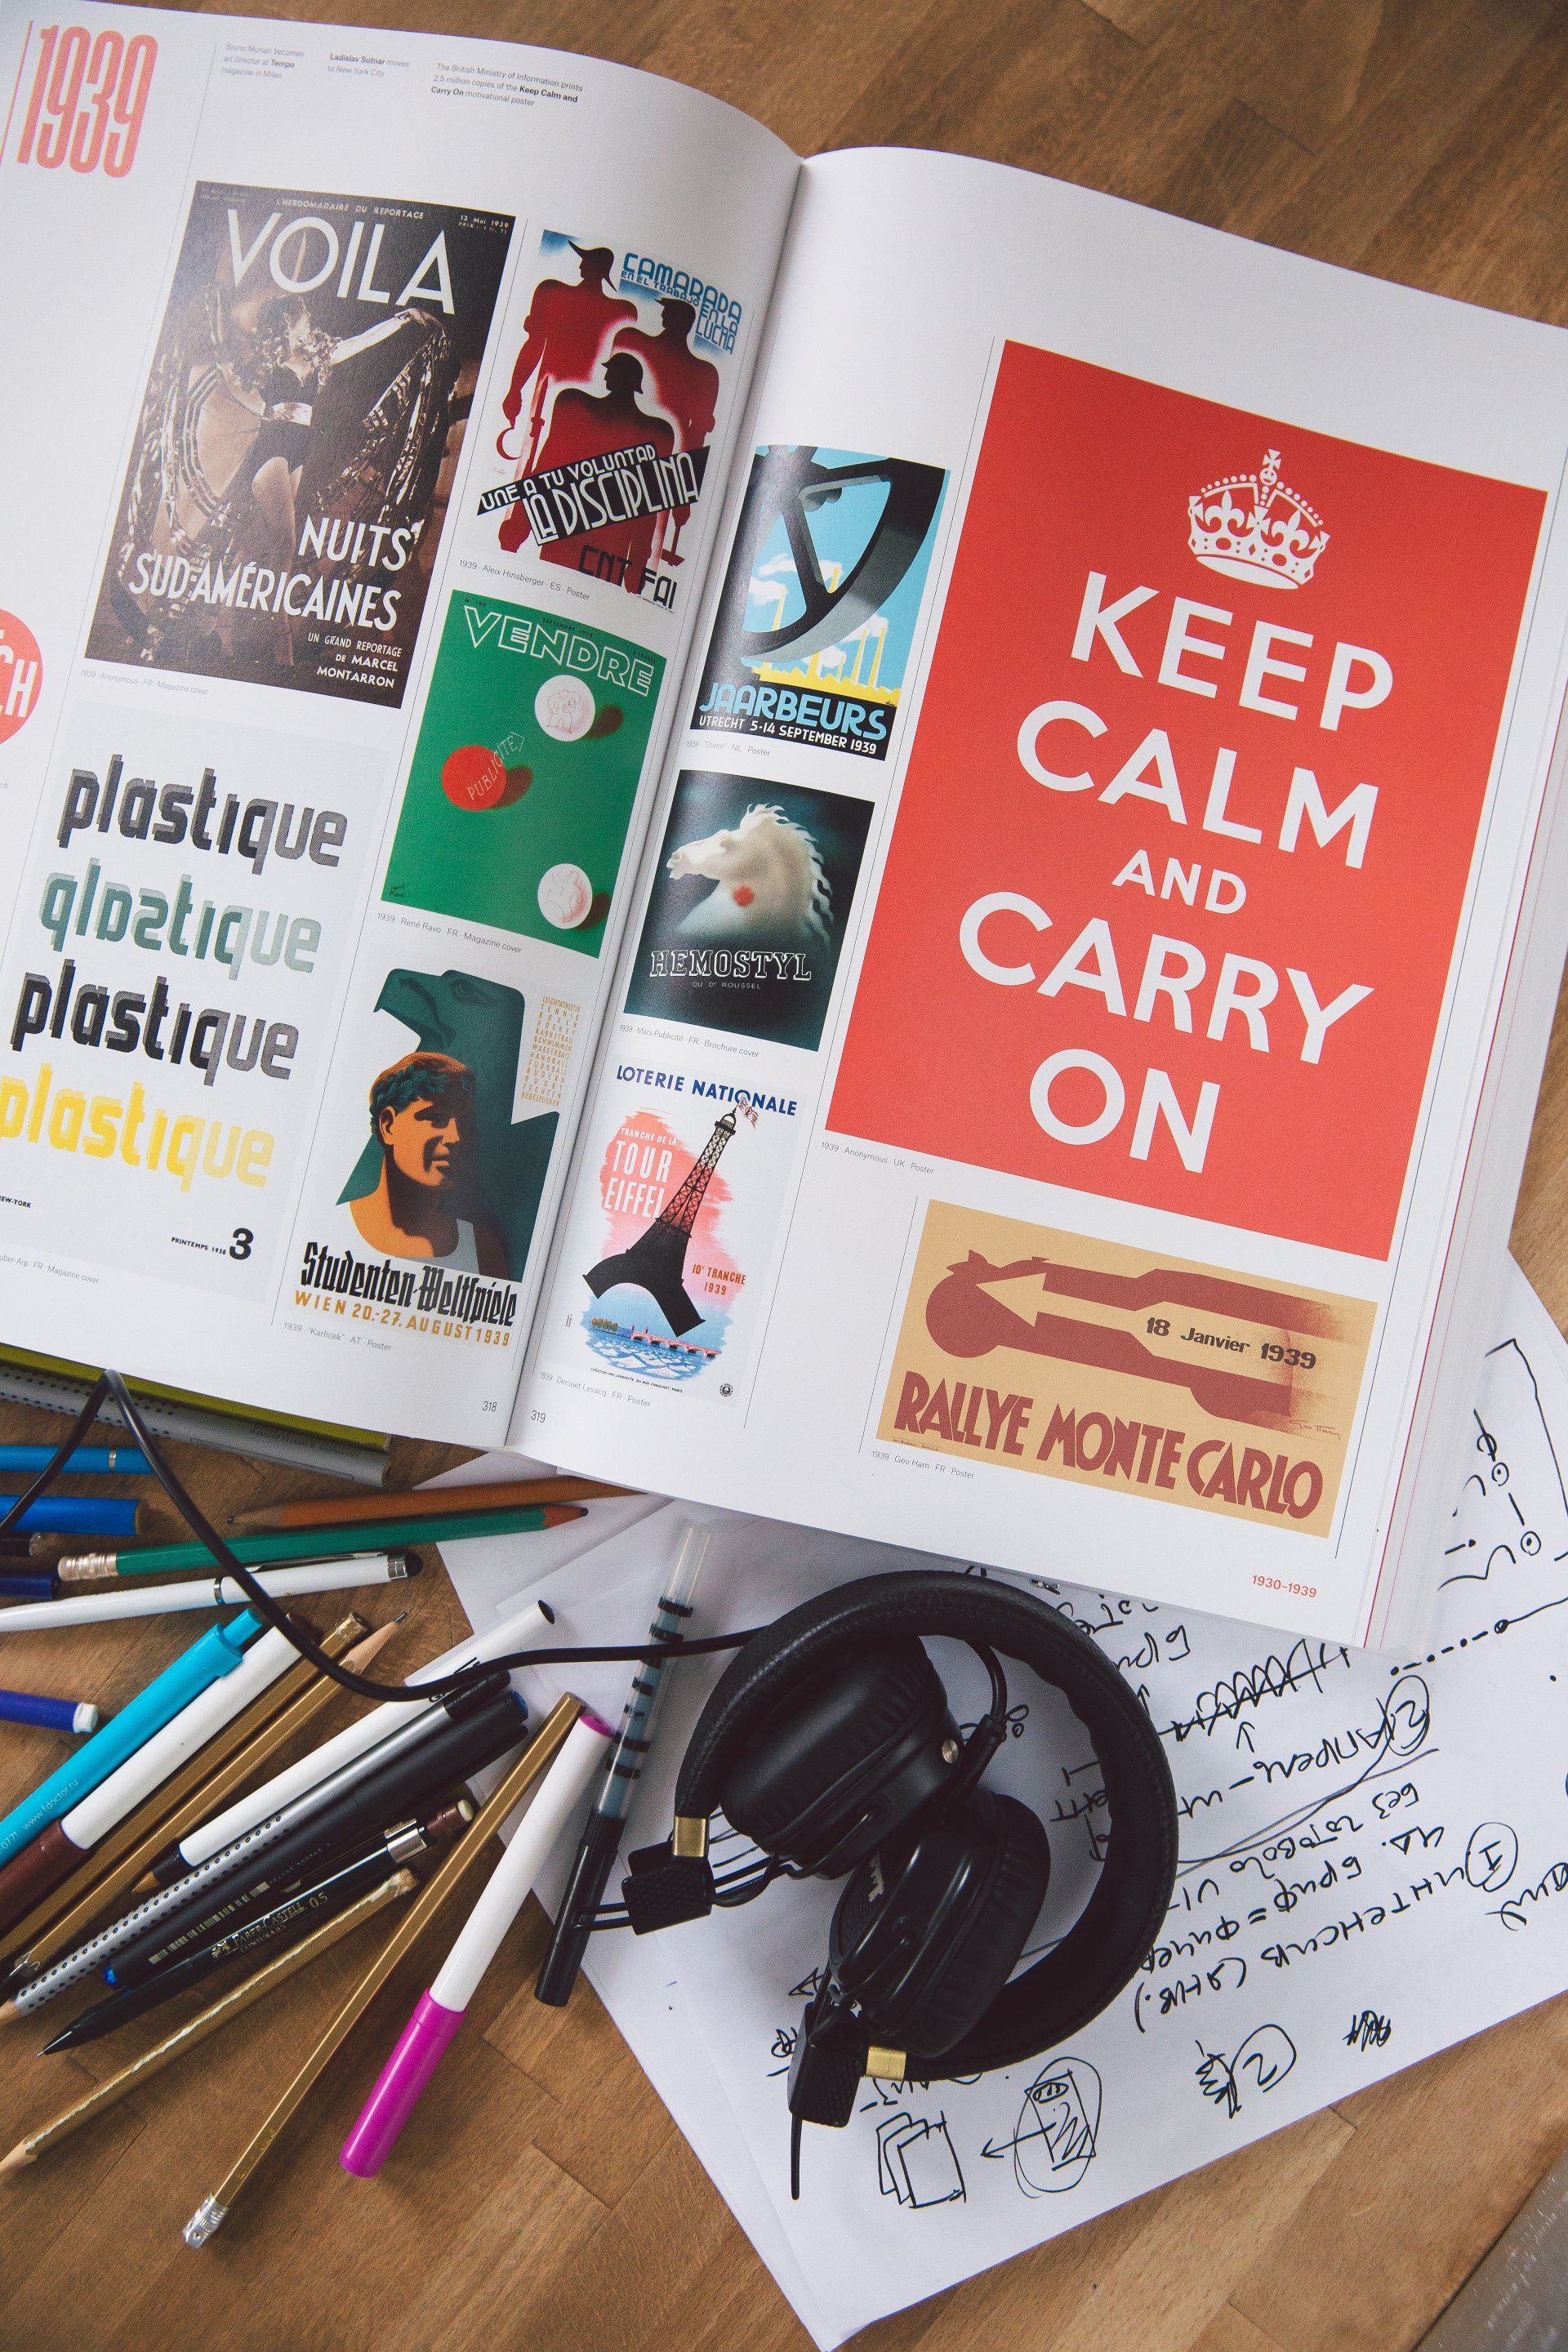 Picture of a book saying keep calm and carry on